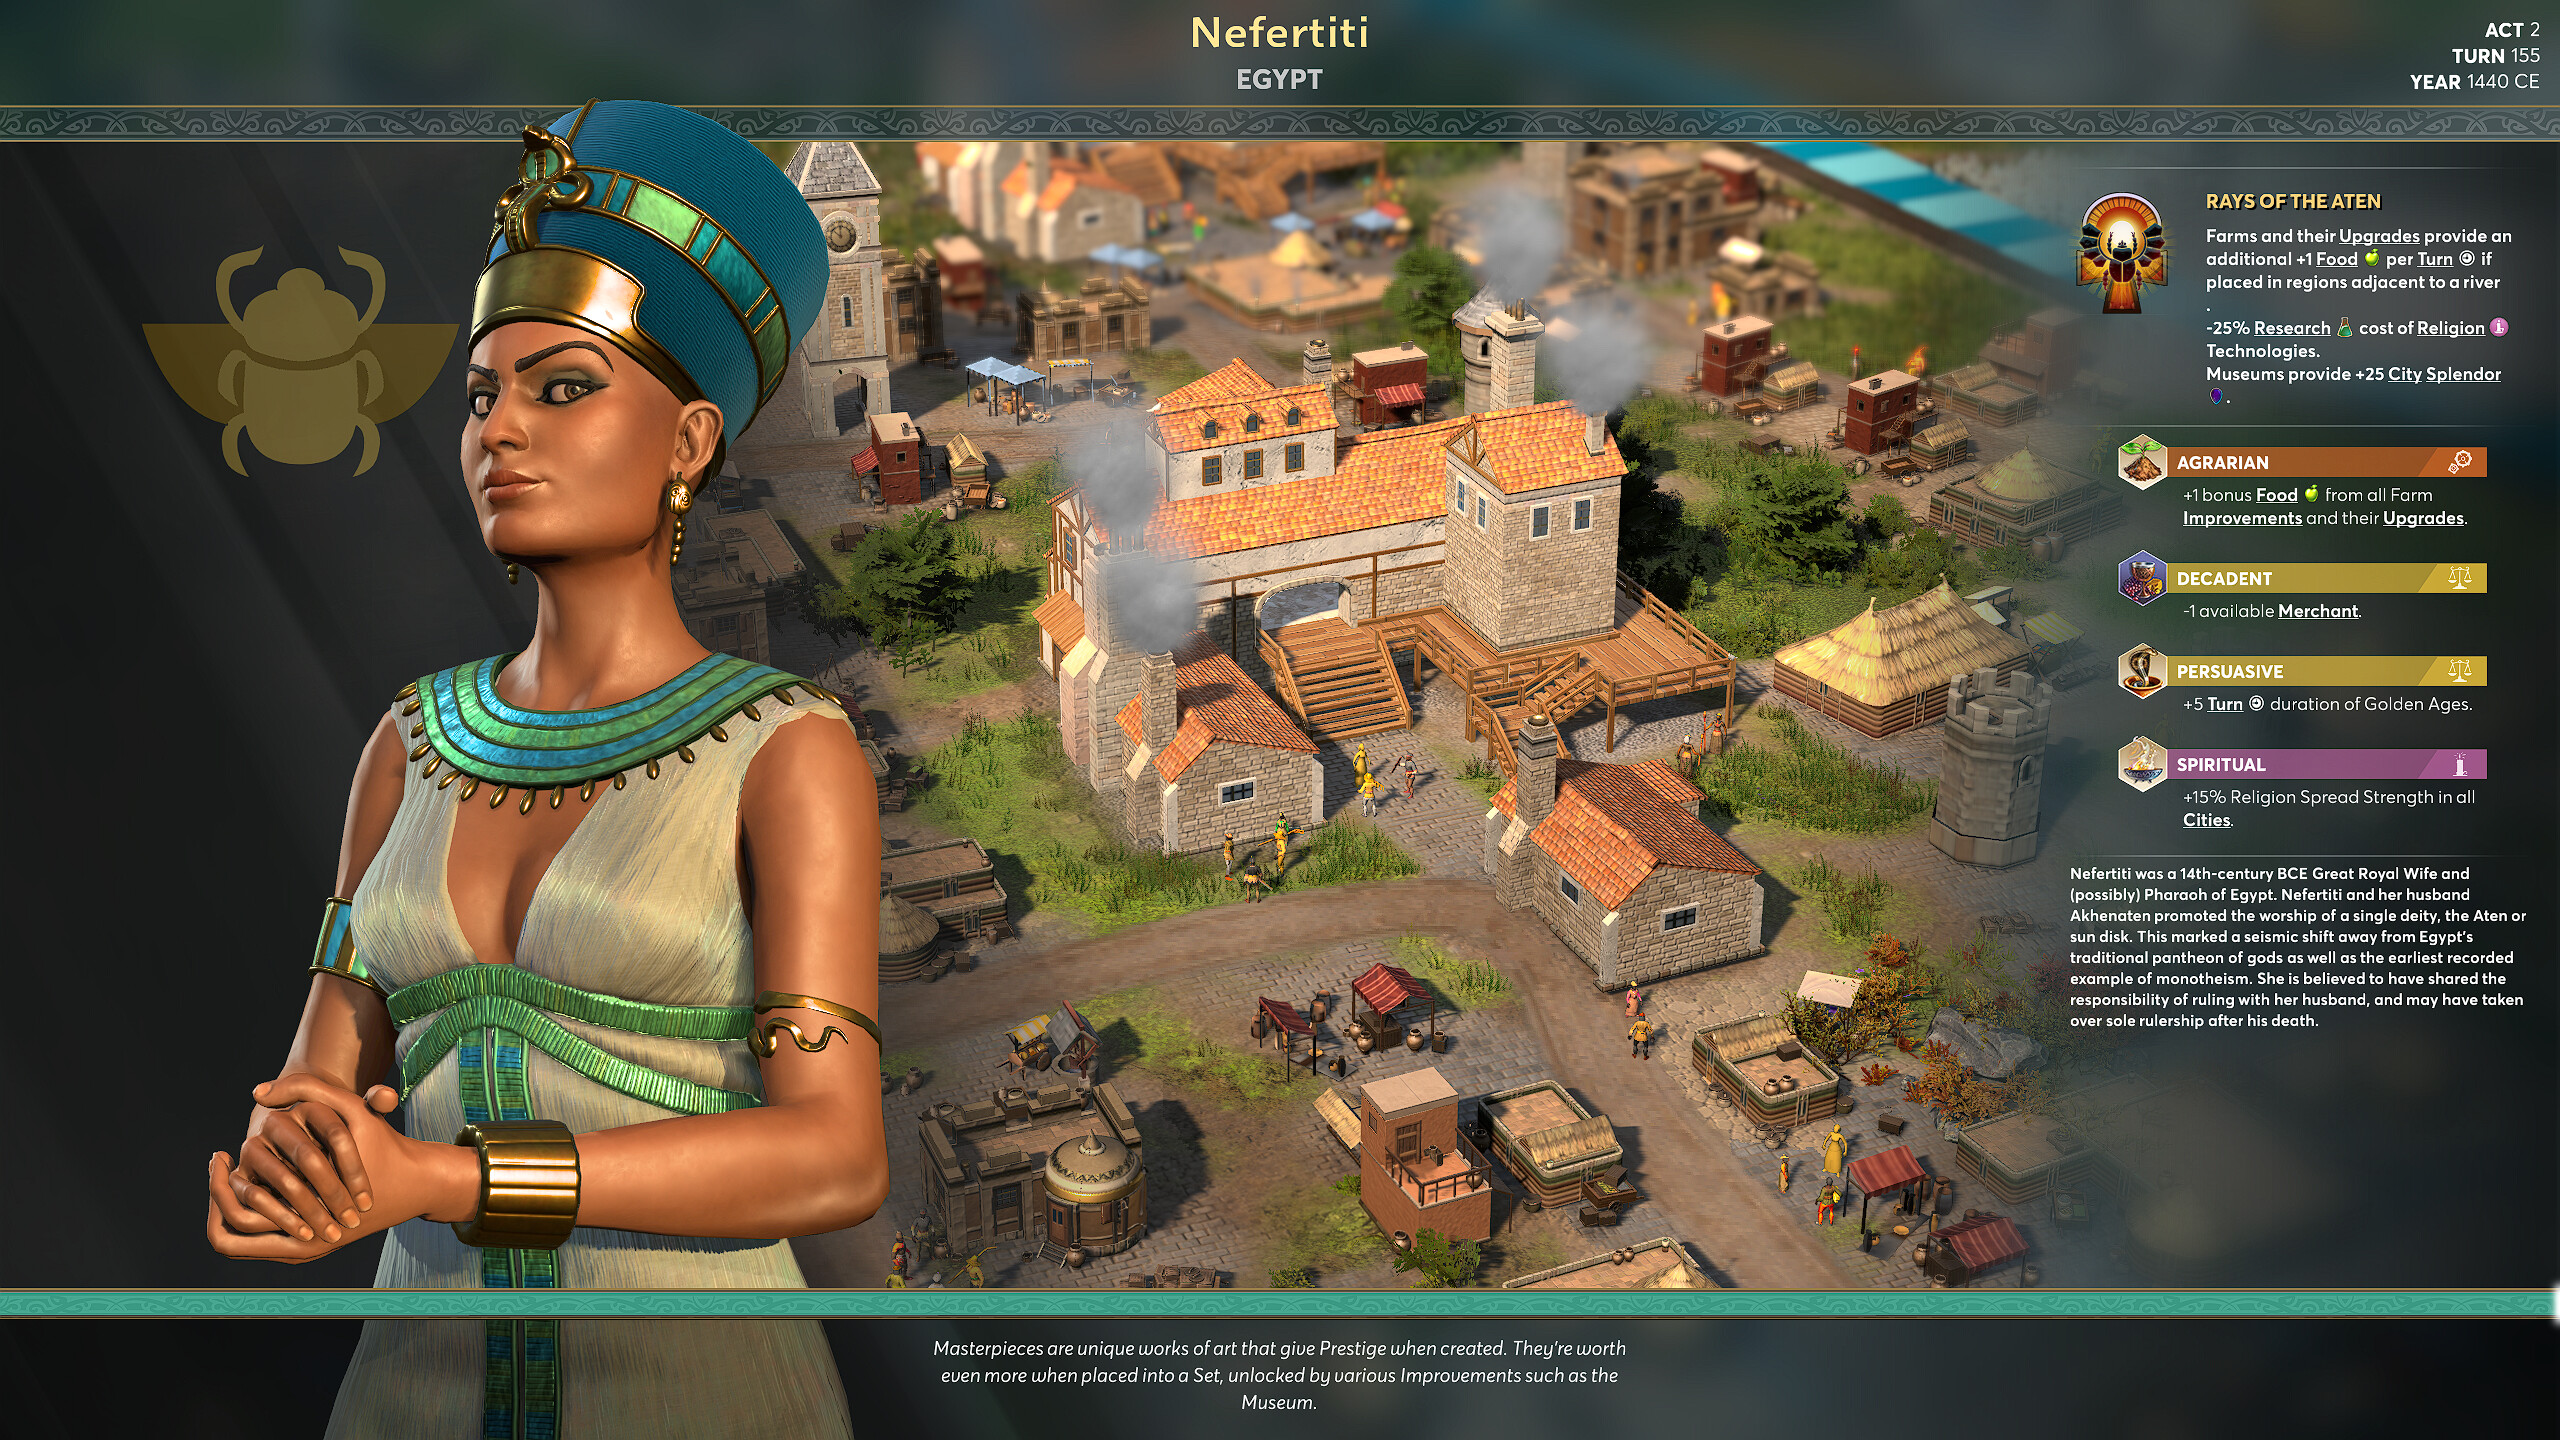 Nefertiti in Egypt menu in Ara: History Untold. An upgrade on screen is called Rays of the Aten: Farms and their Upgrades provide an additional +1 food per turn